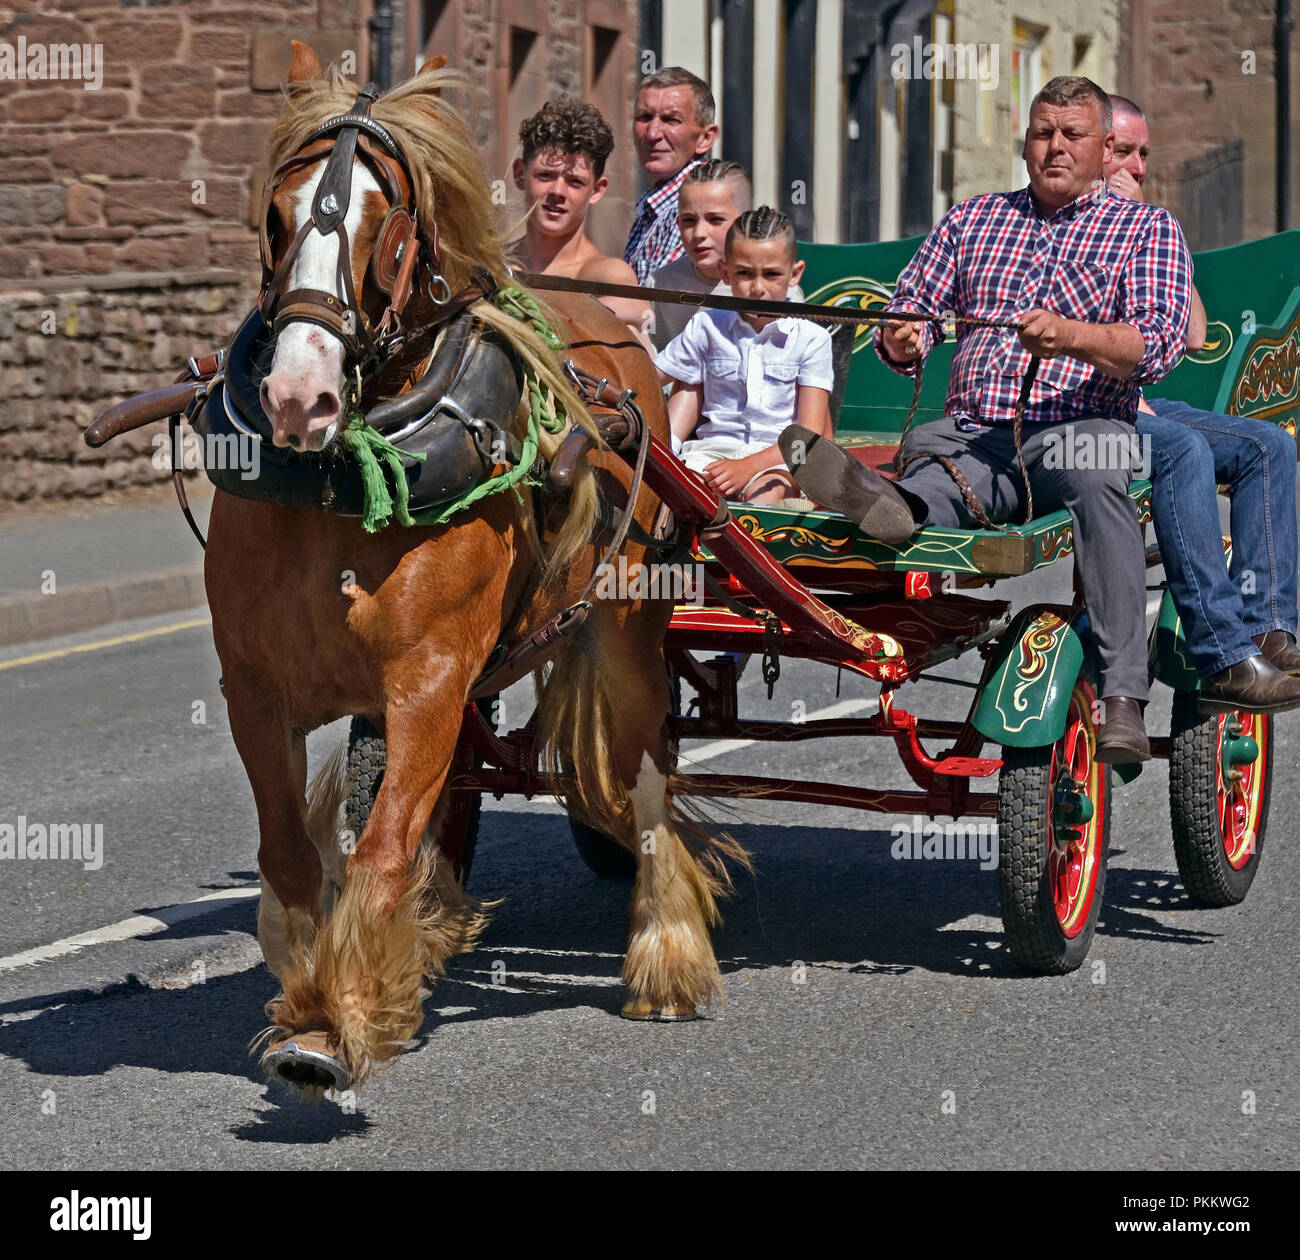 Six Gypsy Travellers riding on cart. Appleby Horse Fair 2018. The Sands, Appleby-in-Westmorland, Cumbria, England, United Kingdom, Europe. Stock Photo